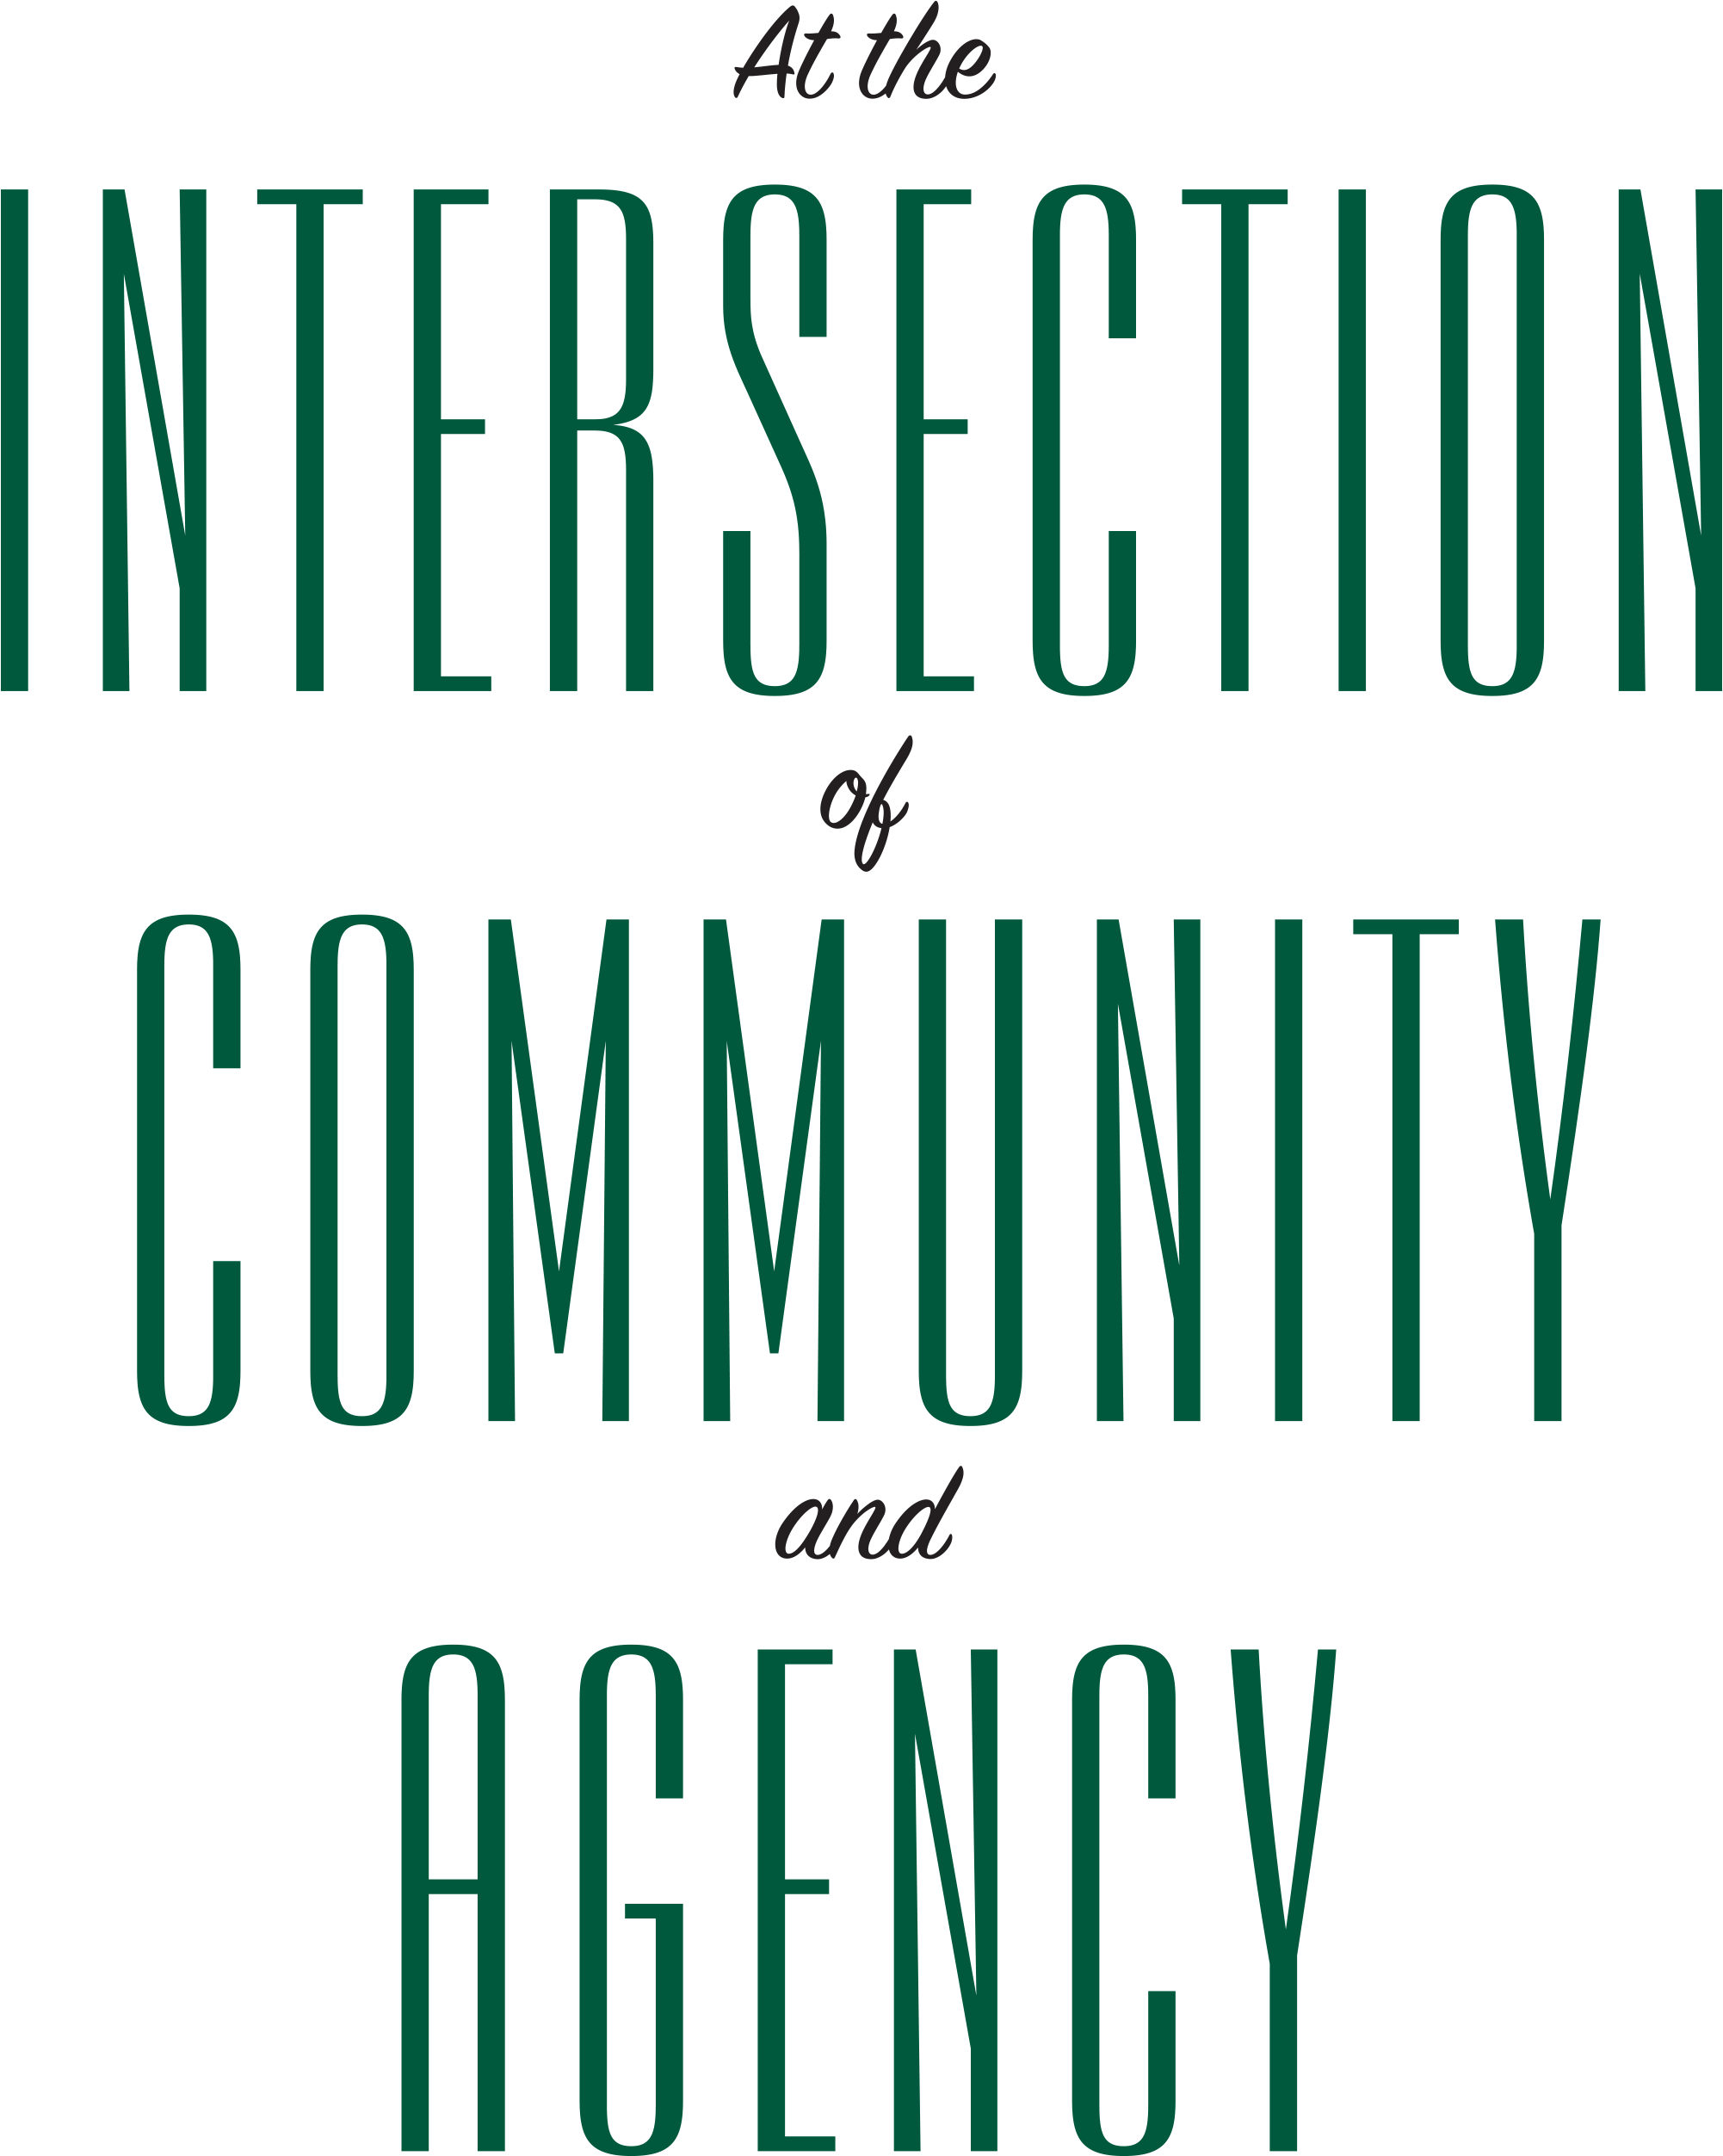 At the Intersection of Community and Agency Title